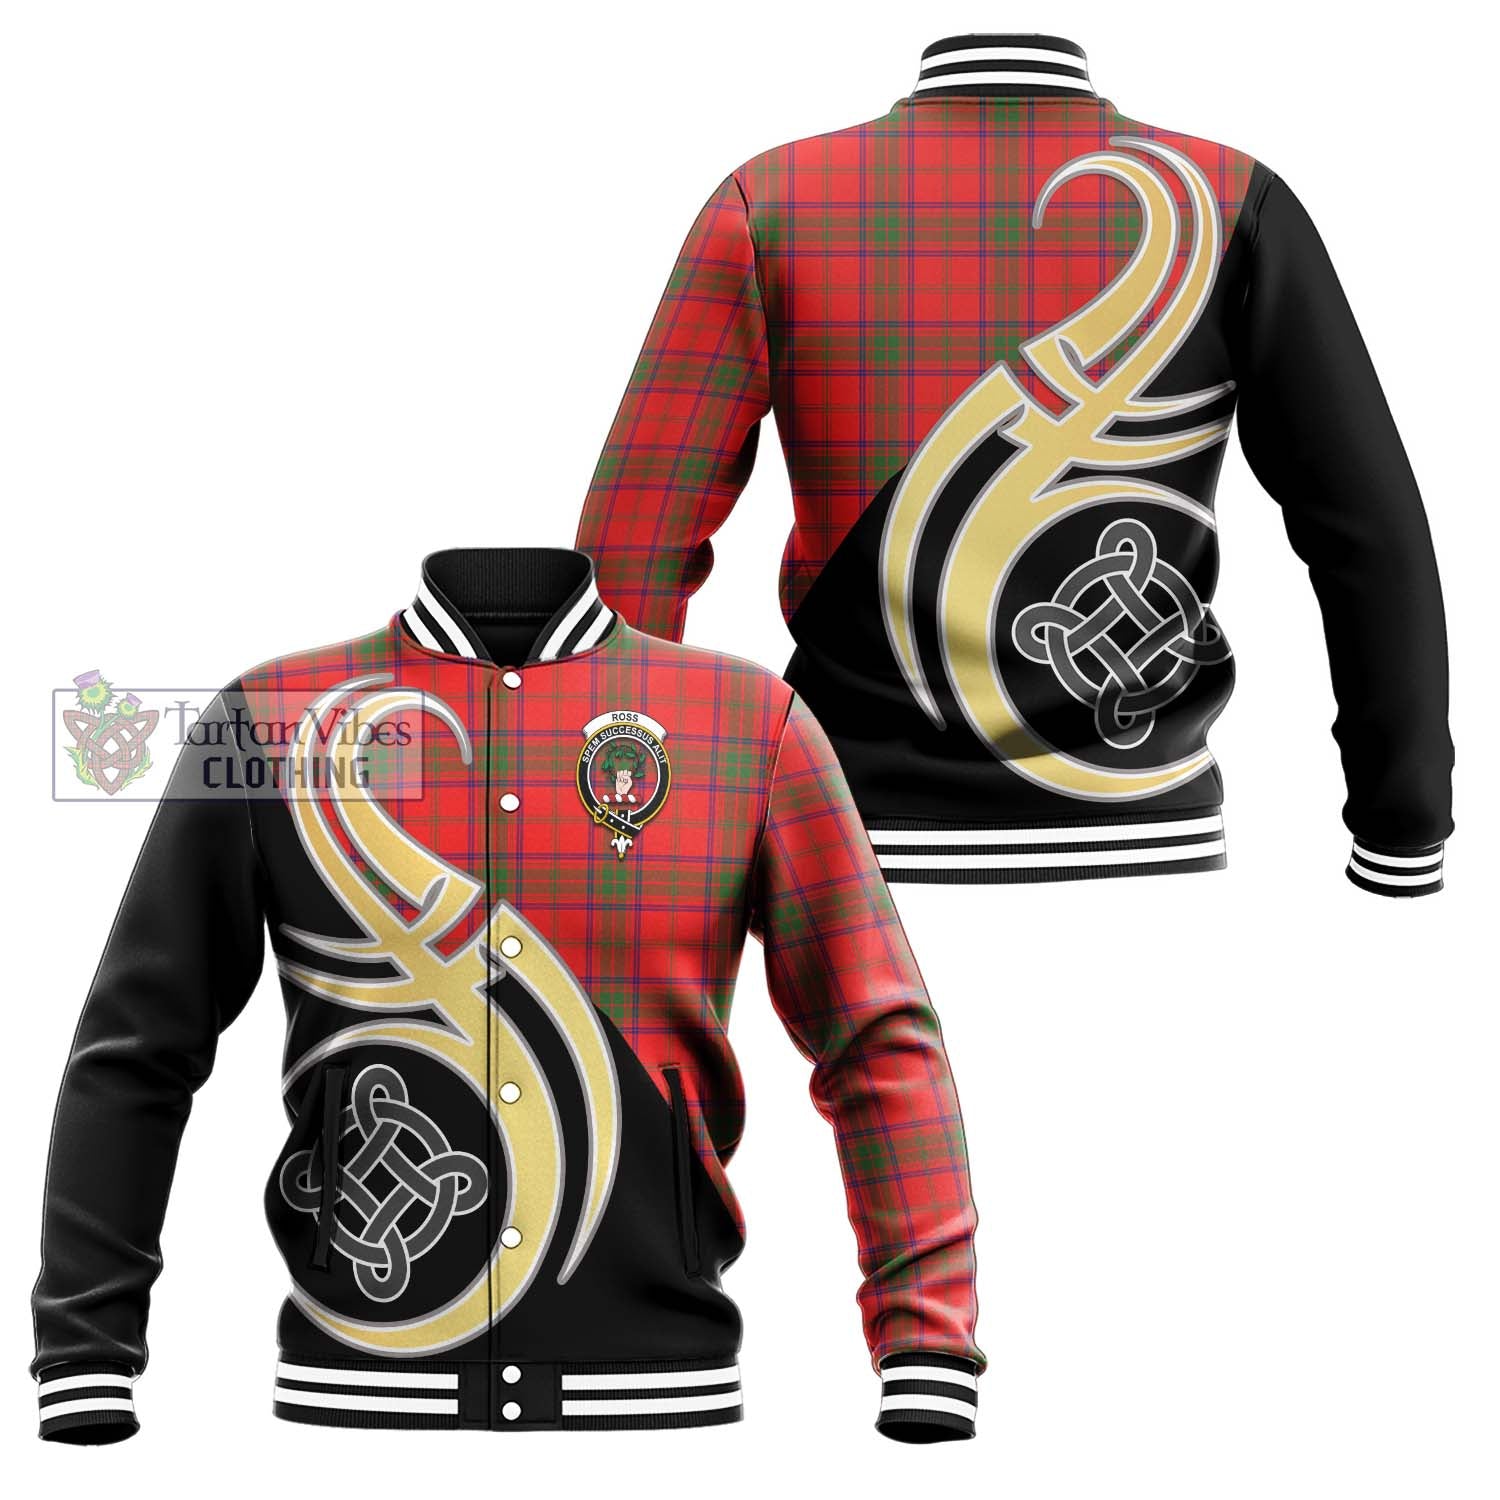 Tartan Vibes Clothing Ross Modern Tartan Baseball Jacket with Family Crest and Celtic Symbol Style